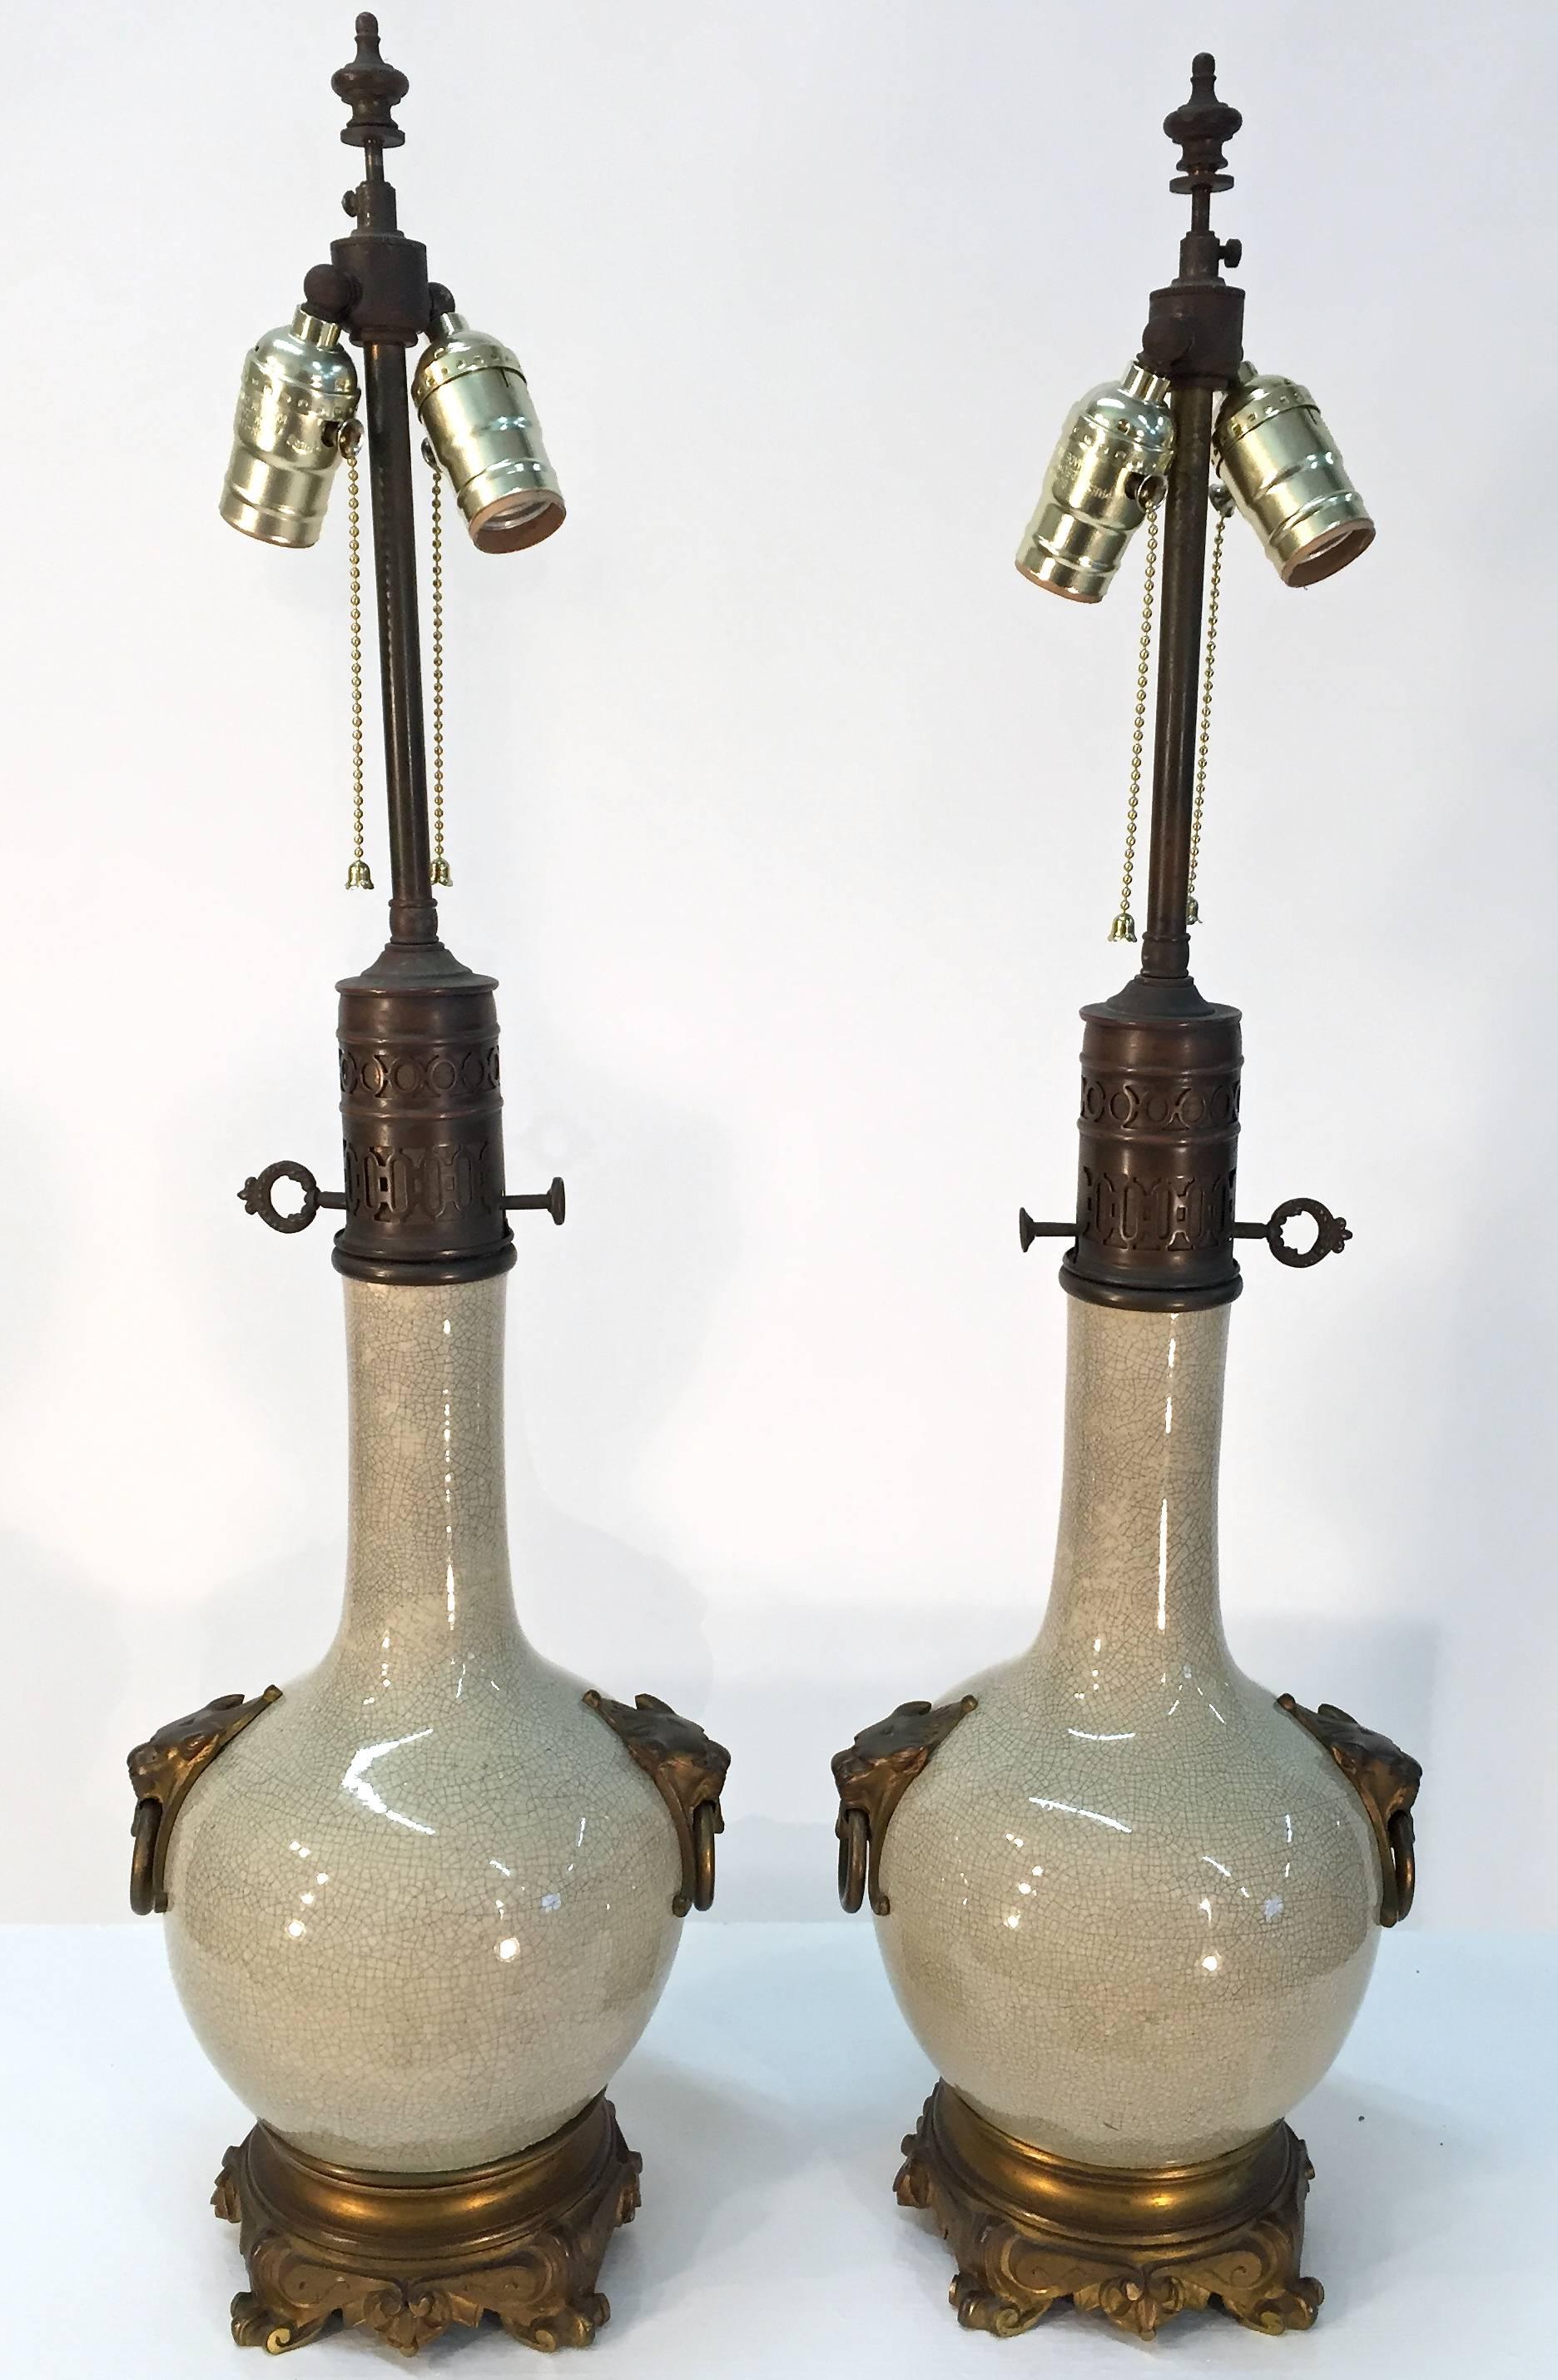 Pair of French, bronze-mounted crackle glaze ceramic table lamps from the late 19th century that were originally oil lamps.